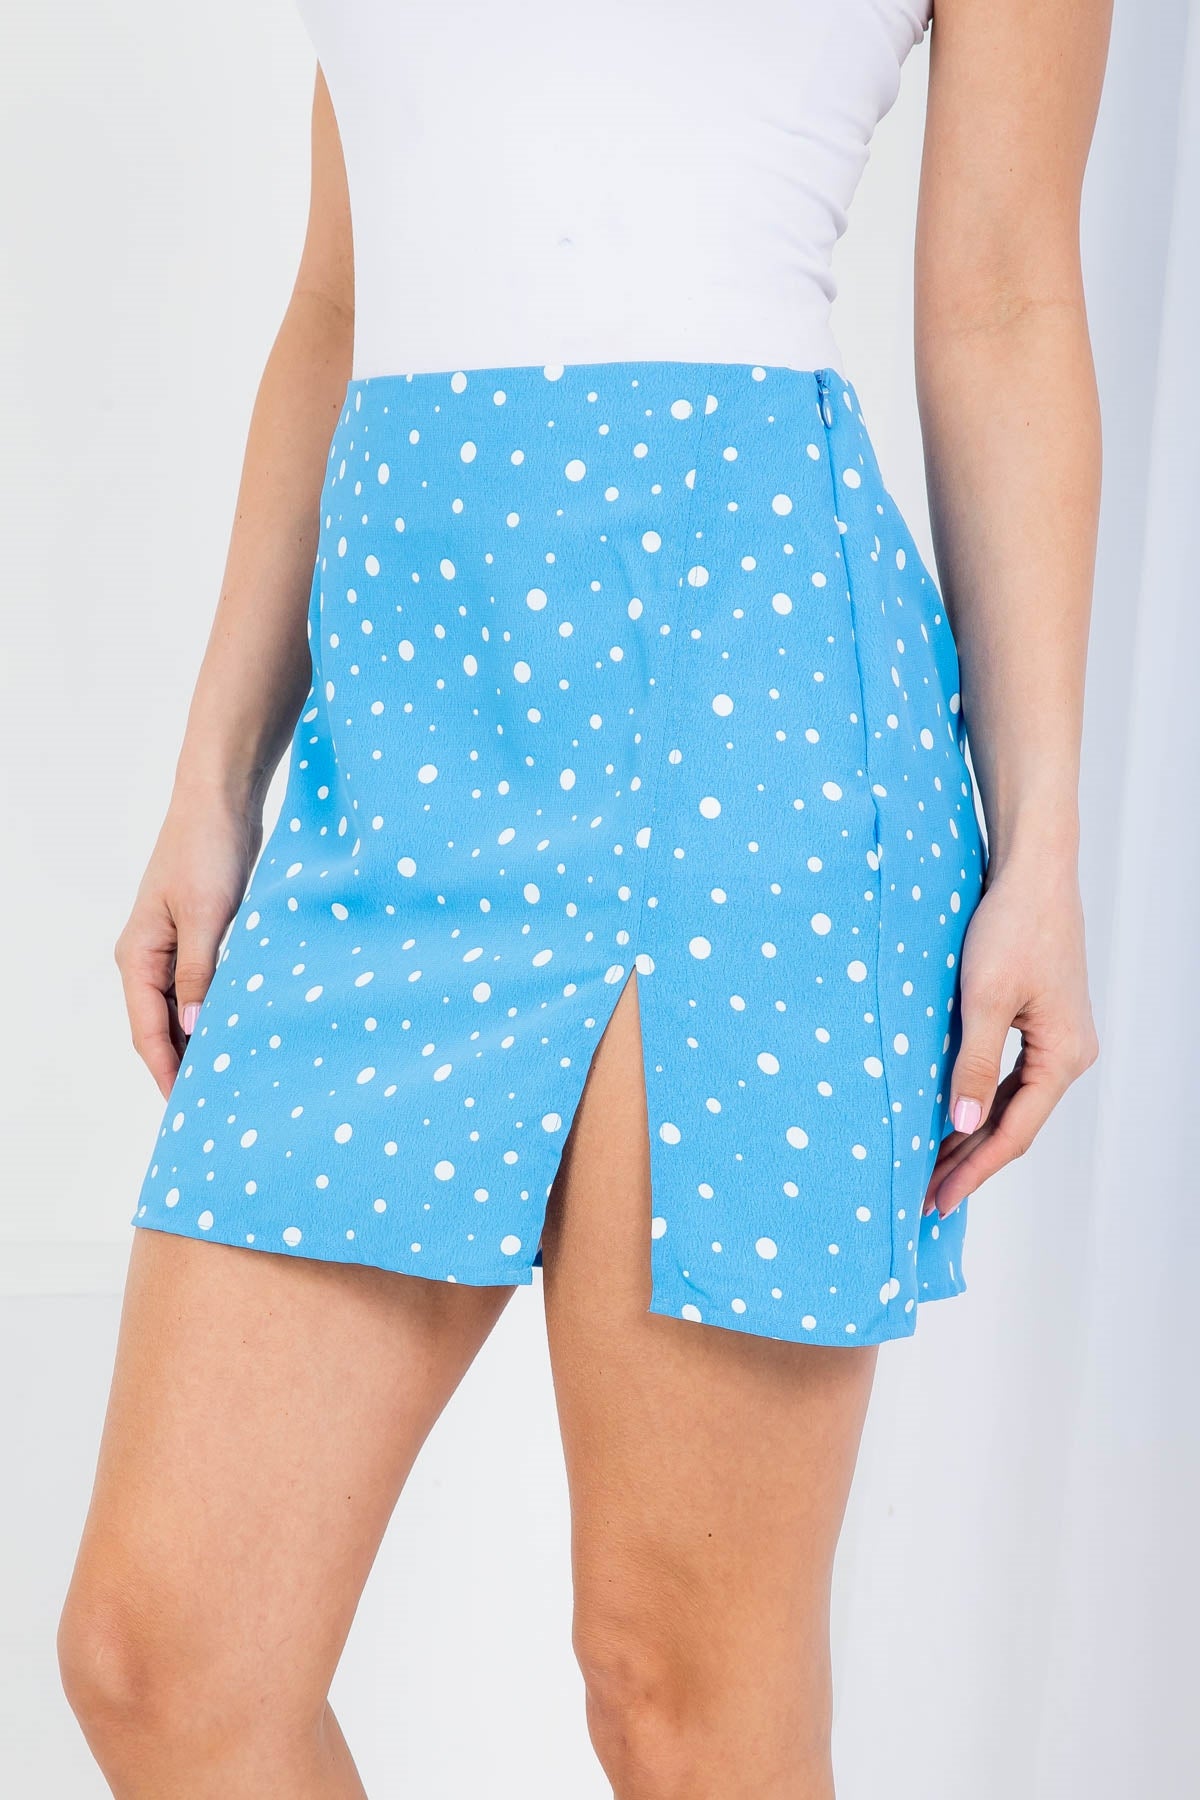 BLUE WITH WHITE POLKA DOTS WITH BACK ZIPPER SKIRT